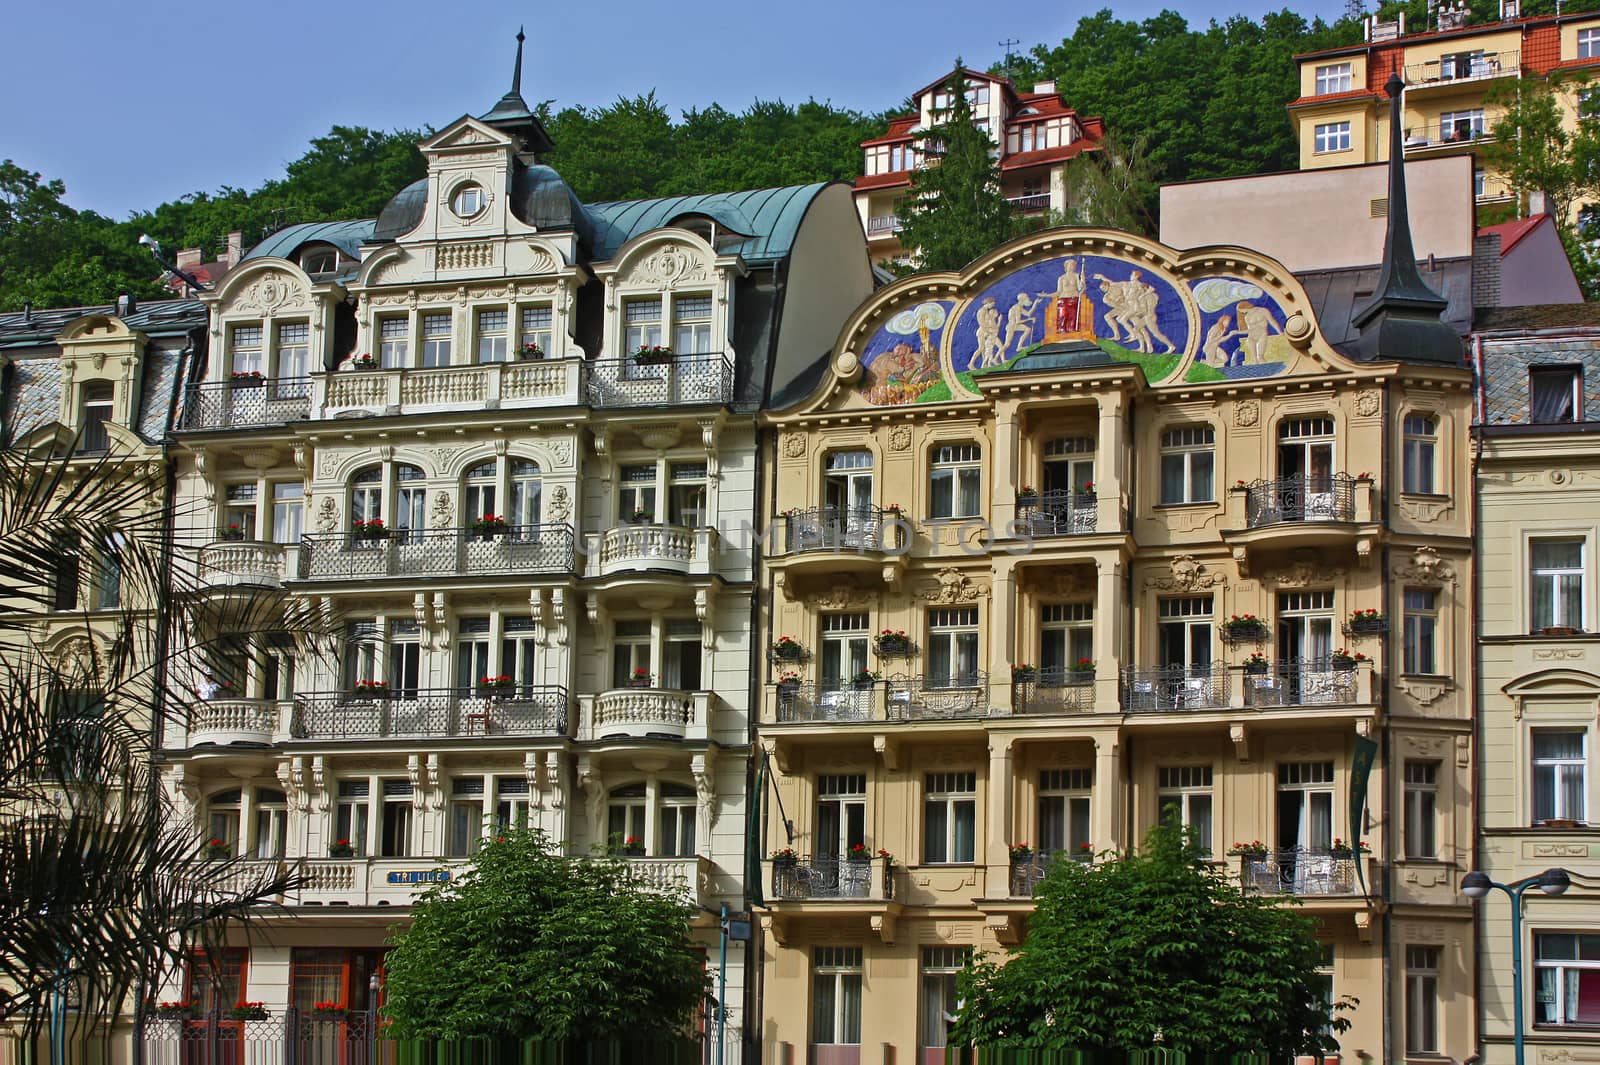 World-famous for its mineral springs, the town of Karlovy Vary (Karlsbad) was founded by Charles IV in the mid-14th century.